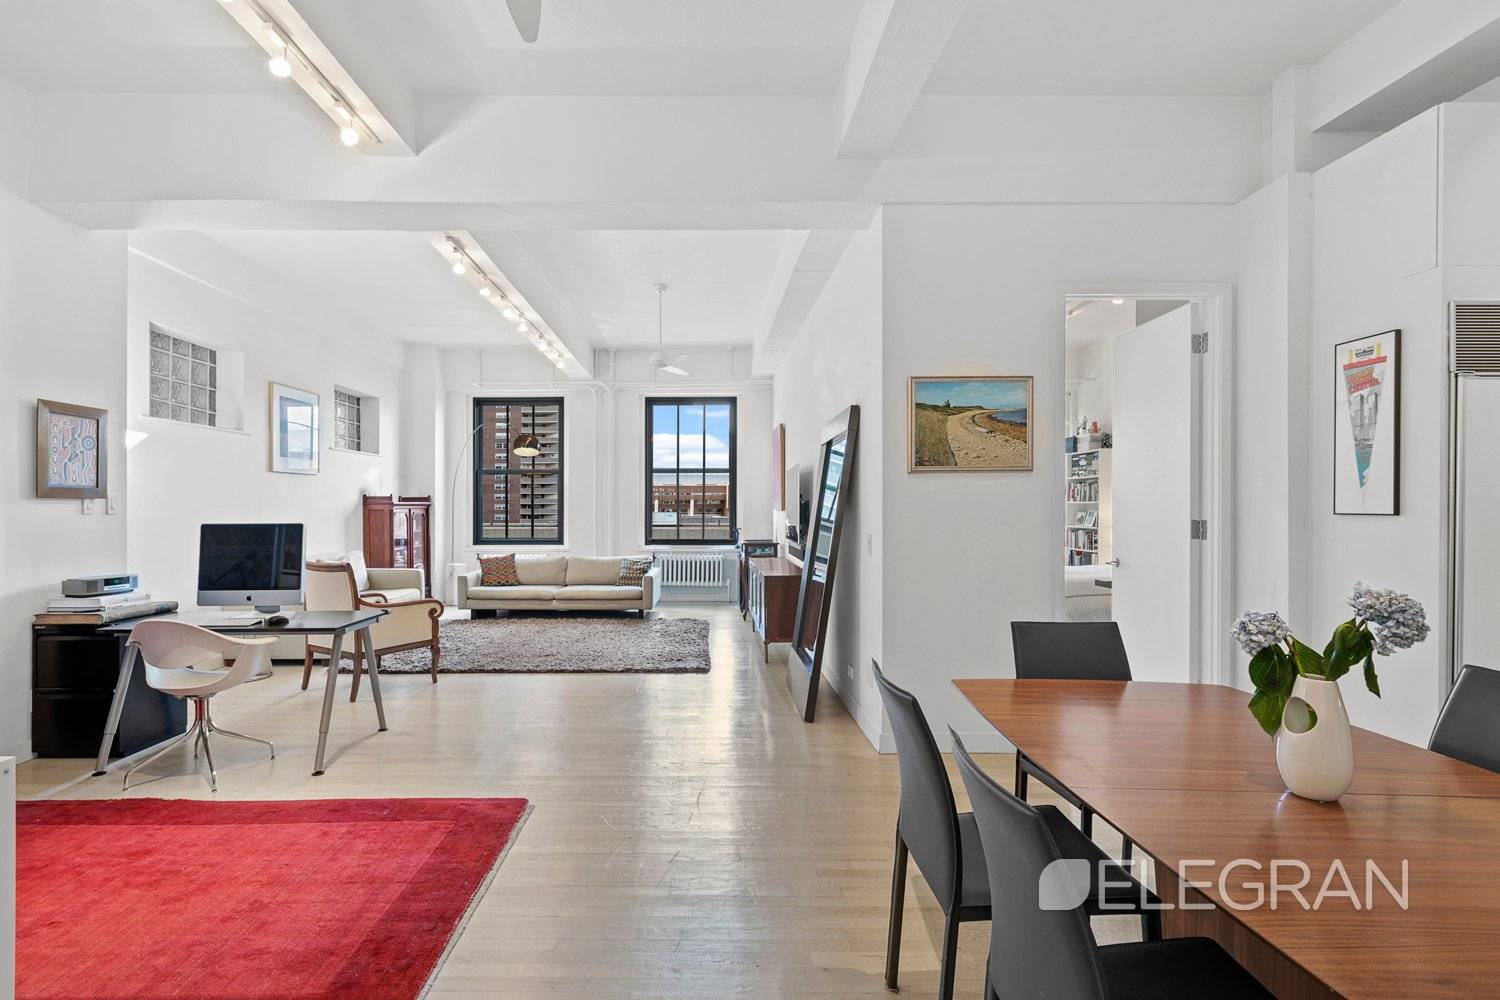 Located on a quiet cobblestone street in prime Tribeca, you will find this spacious 2 bedroom, 2 bathroom home with soaring 11.